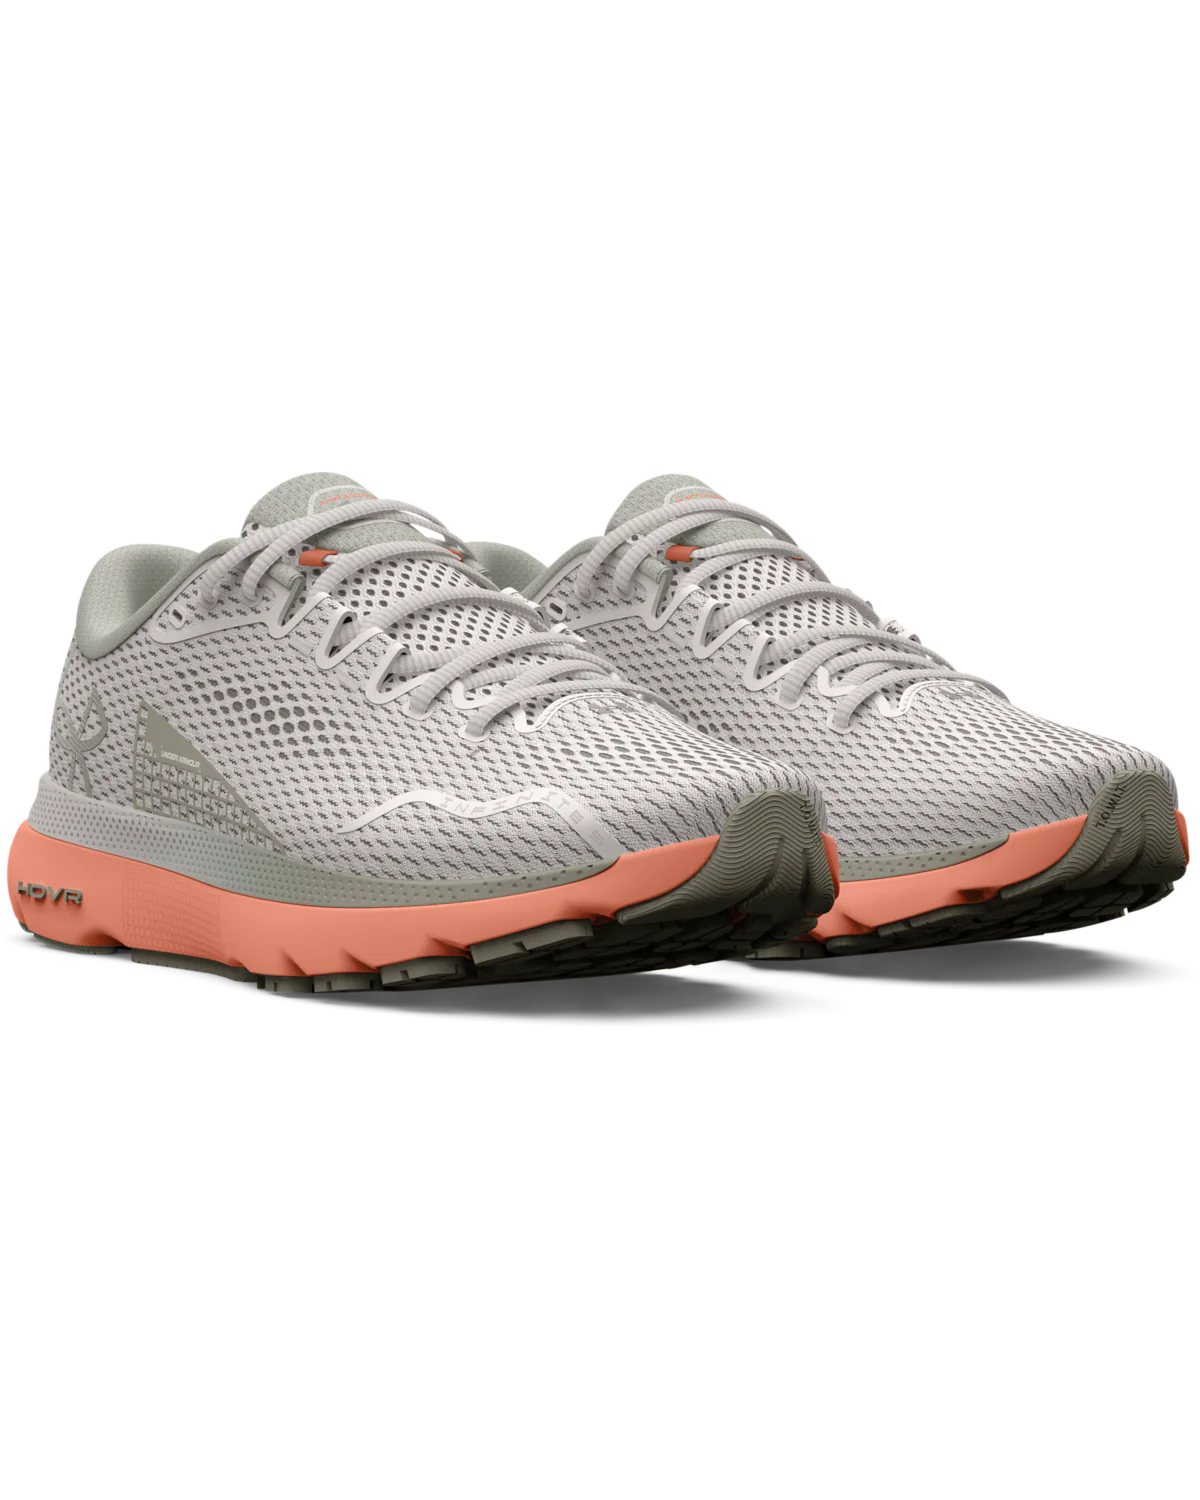 Under Armour HOVR Infinite 5 Grey Pink